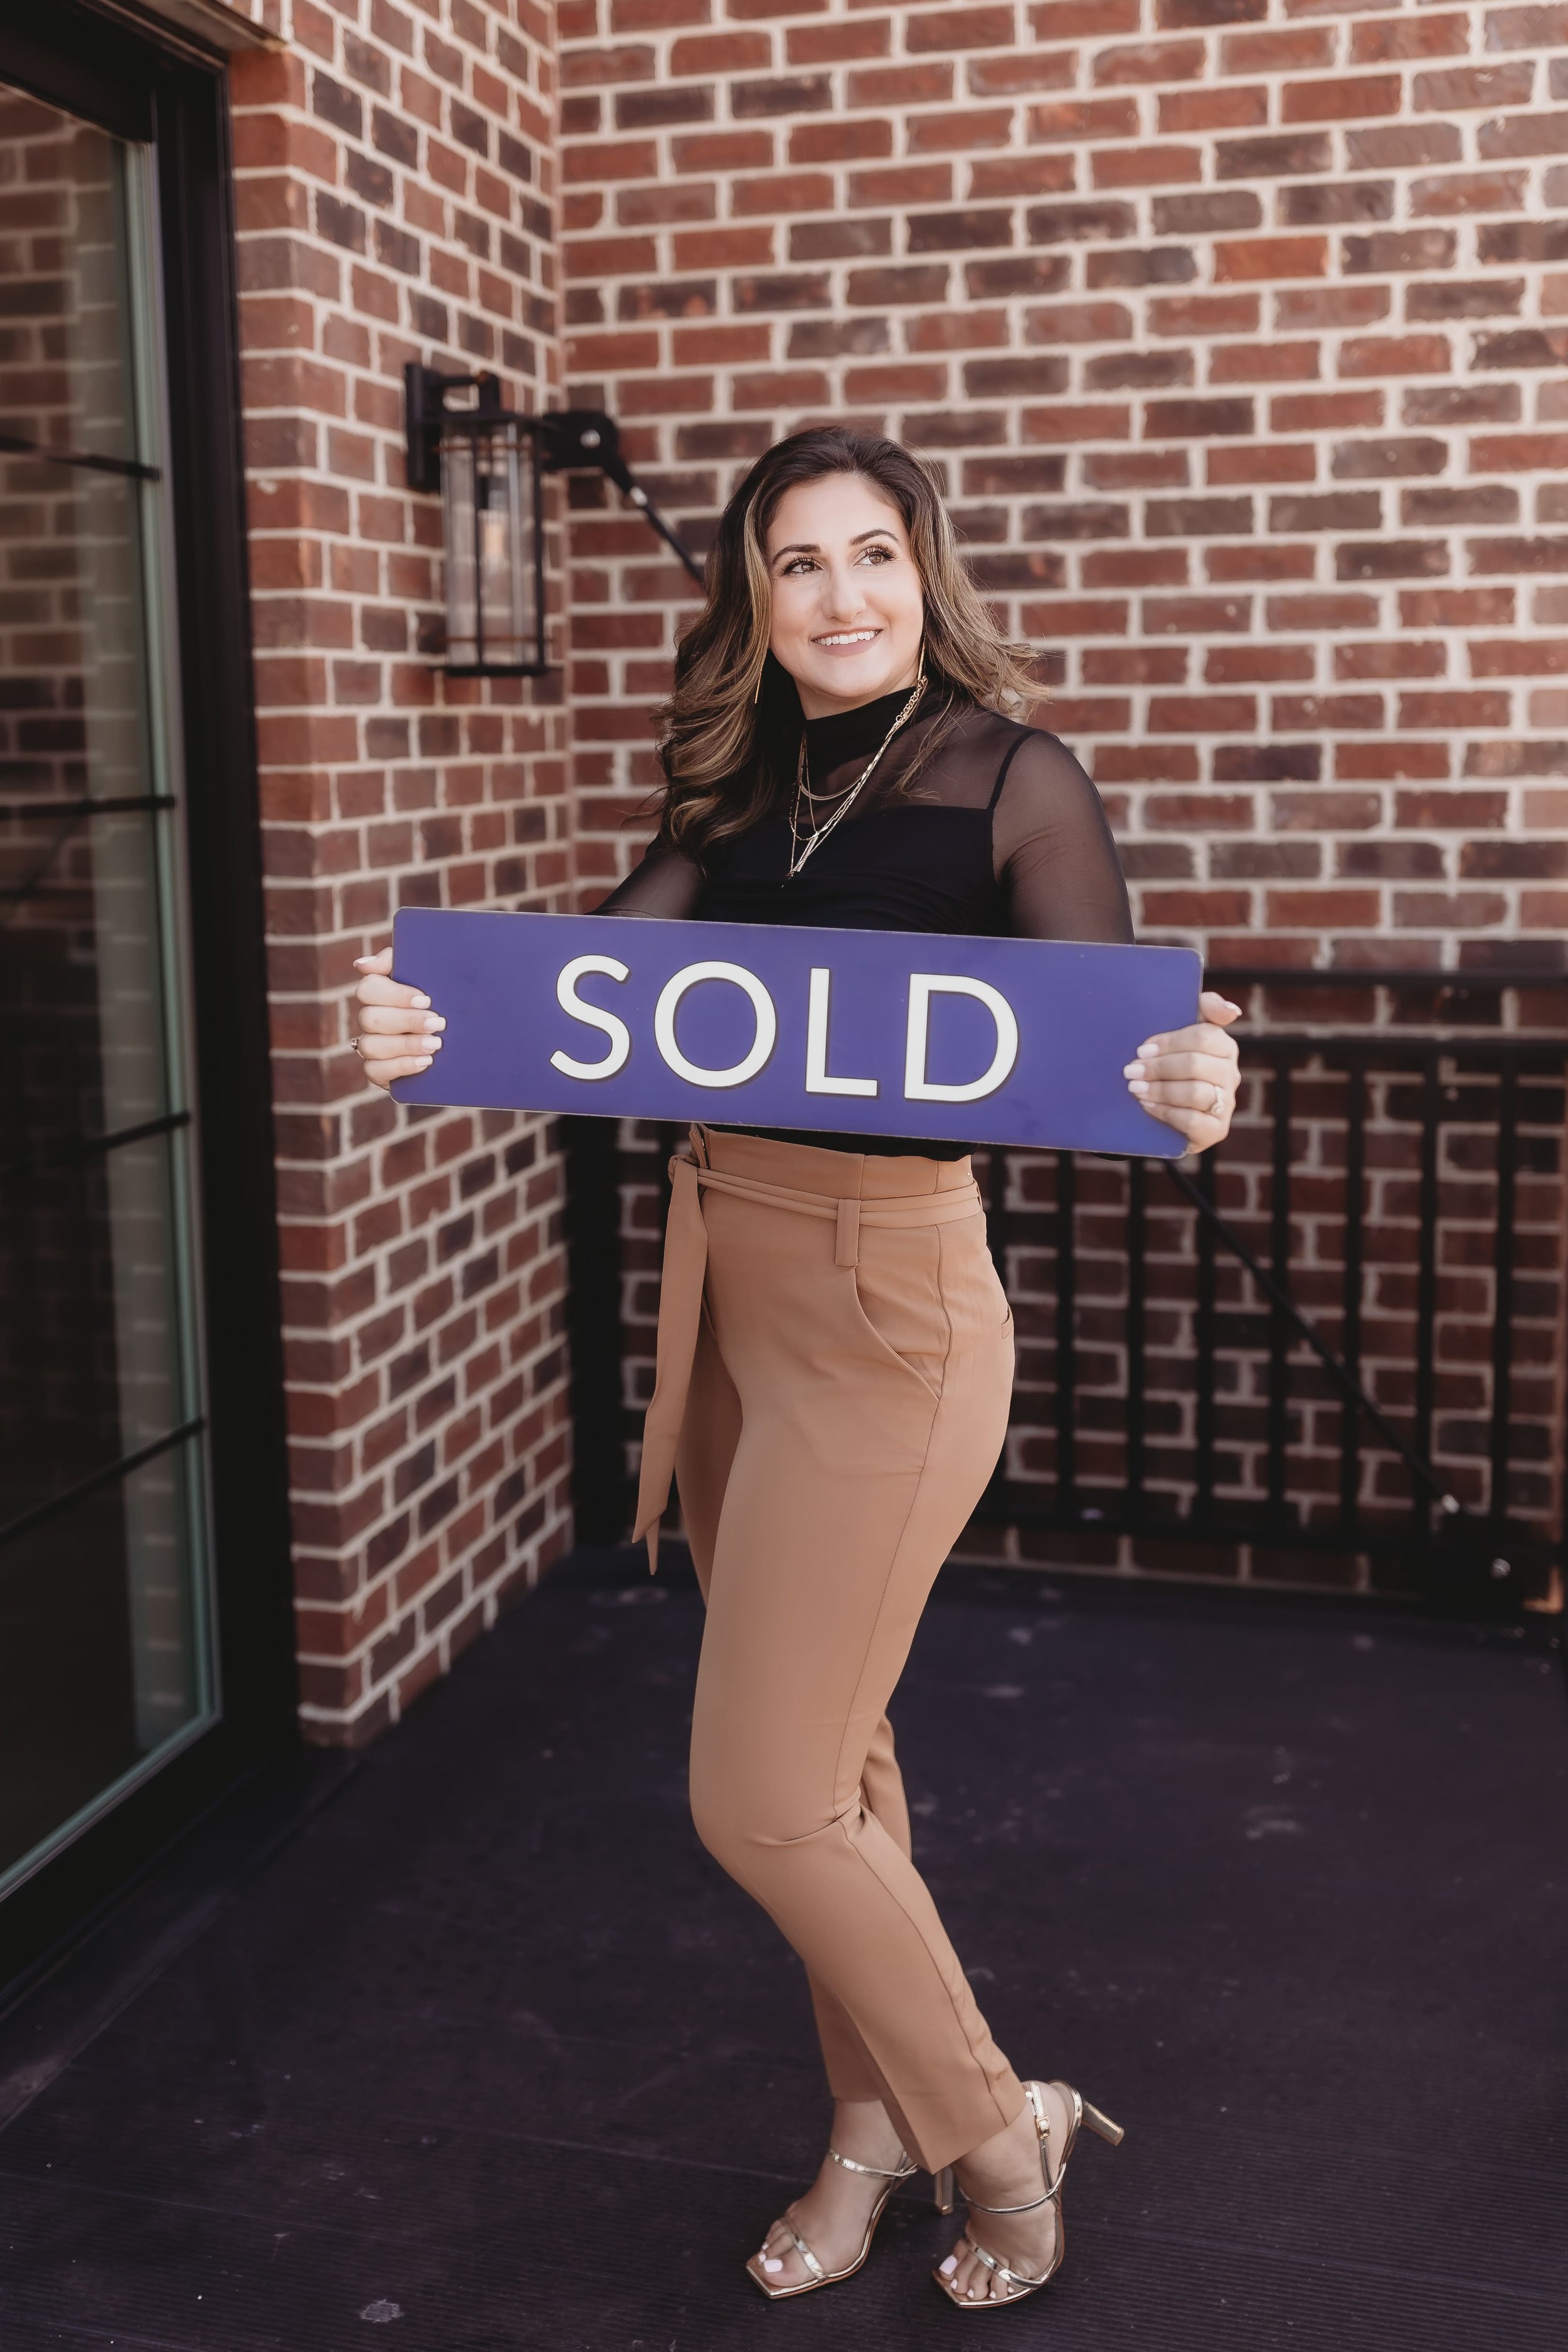  a woman smiles and looks to the side while holding a sold sign for realtor branding photos 